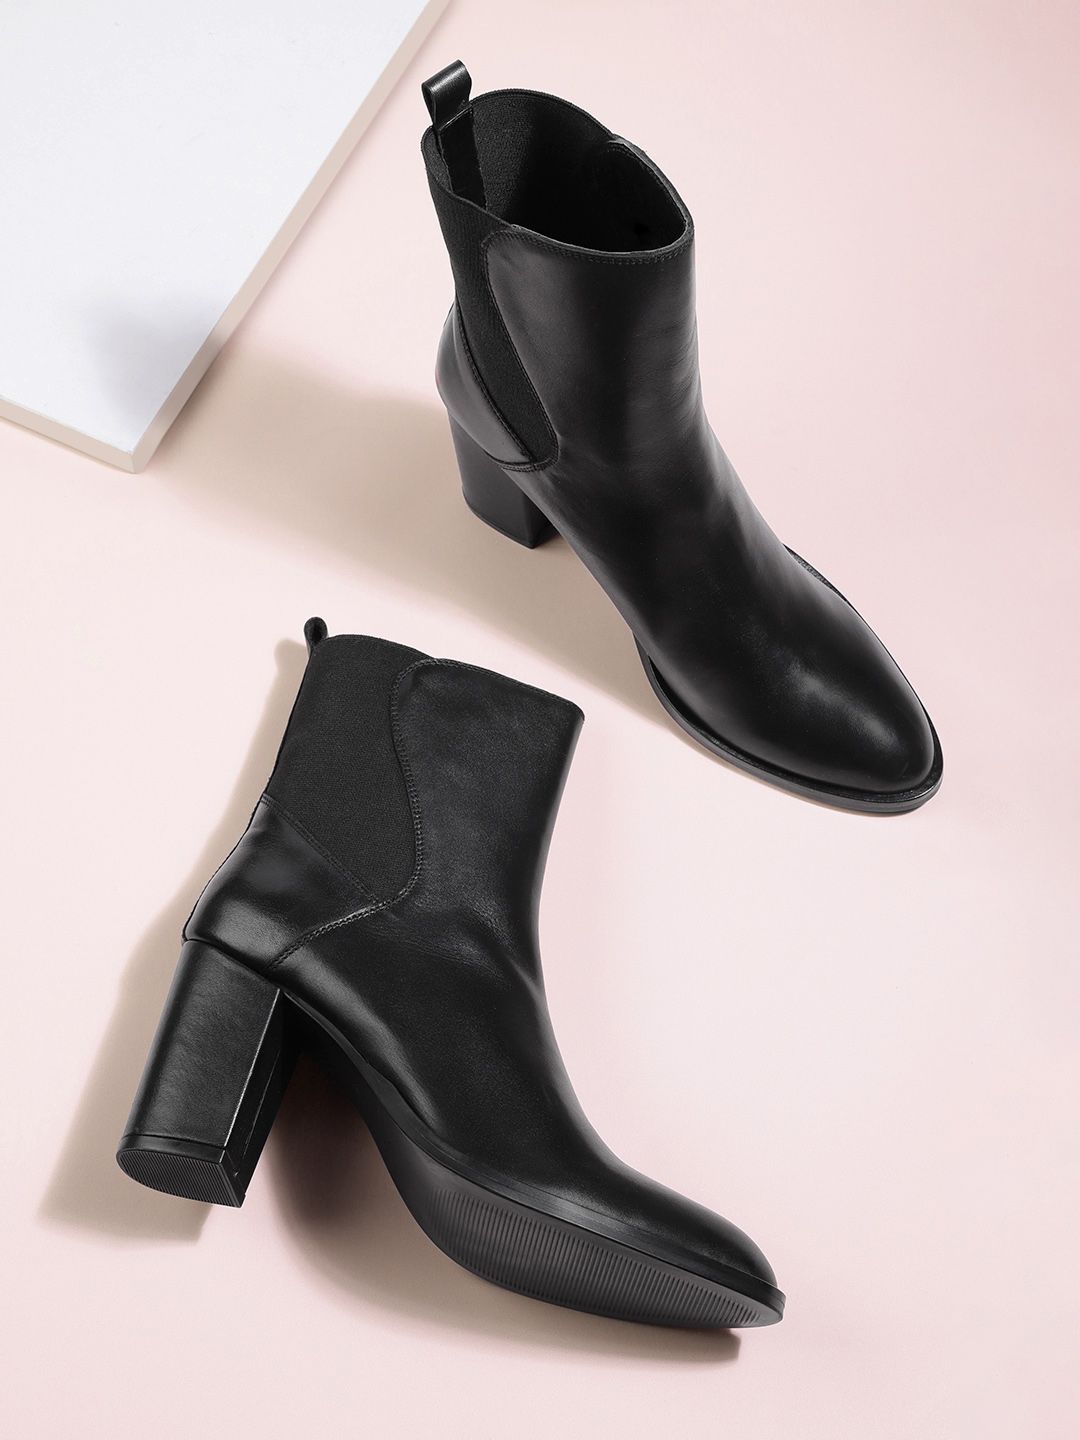 Nautica Black High-Top Block Leather Heeled Boots Price in India